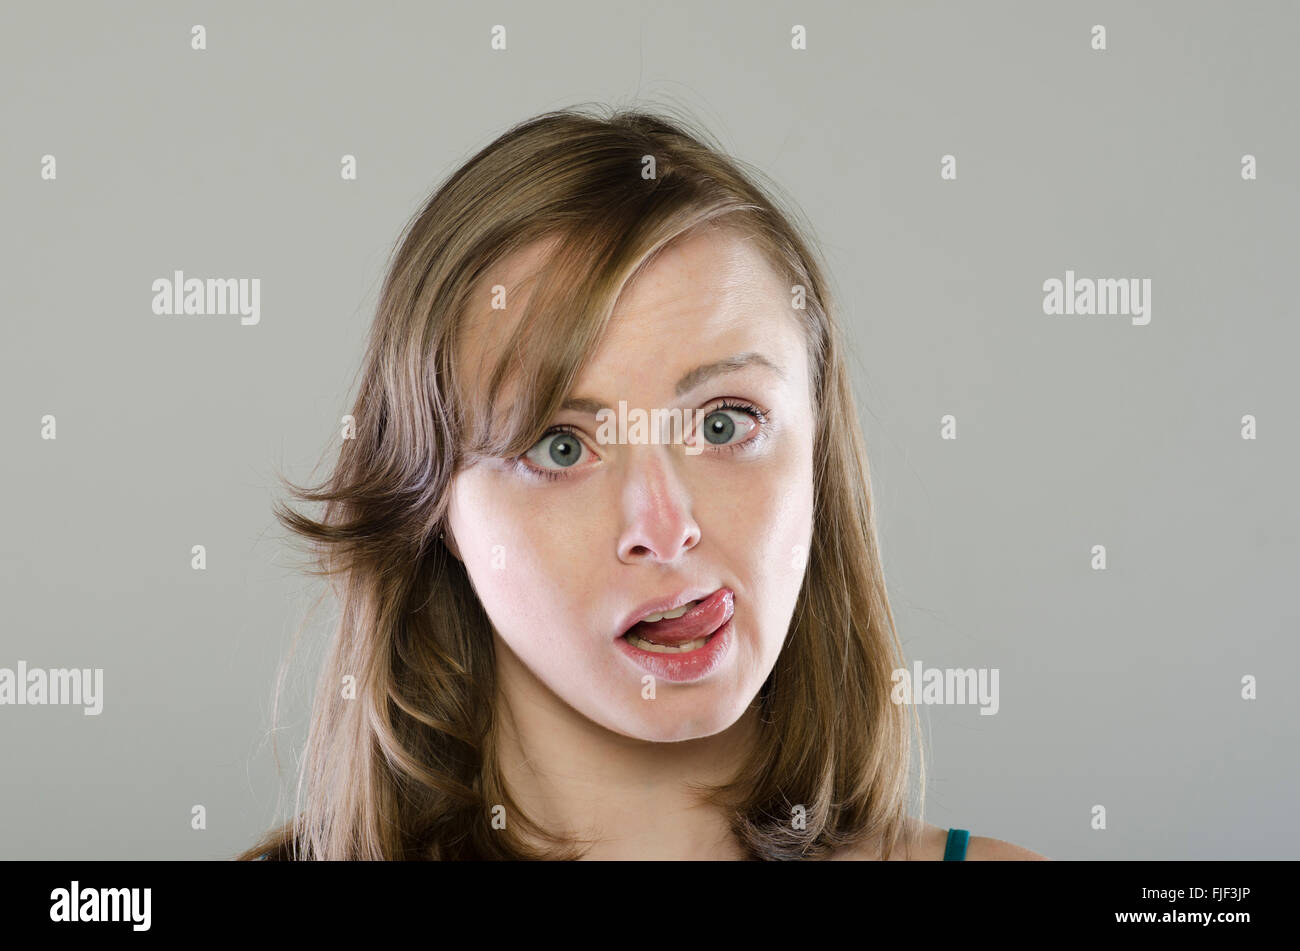 Young woman pulling a funny face Stock Photo